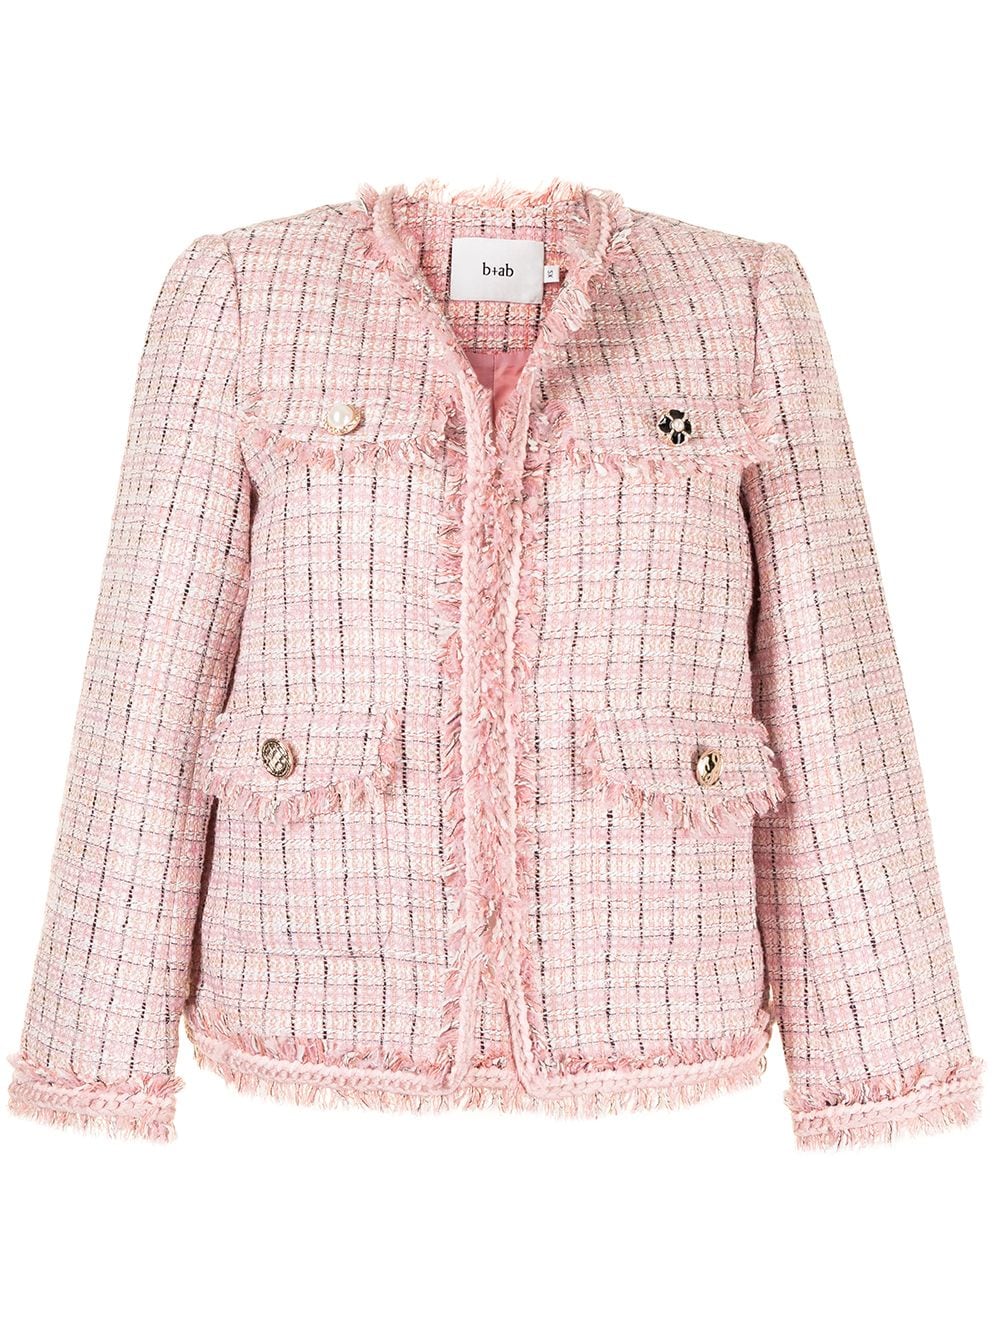 Shop b+ab fitted tweed jacket with Express Delivery - FARFETCH